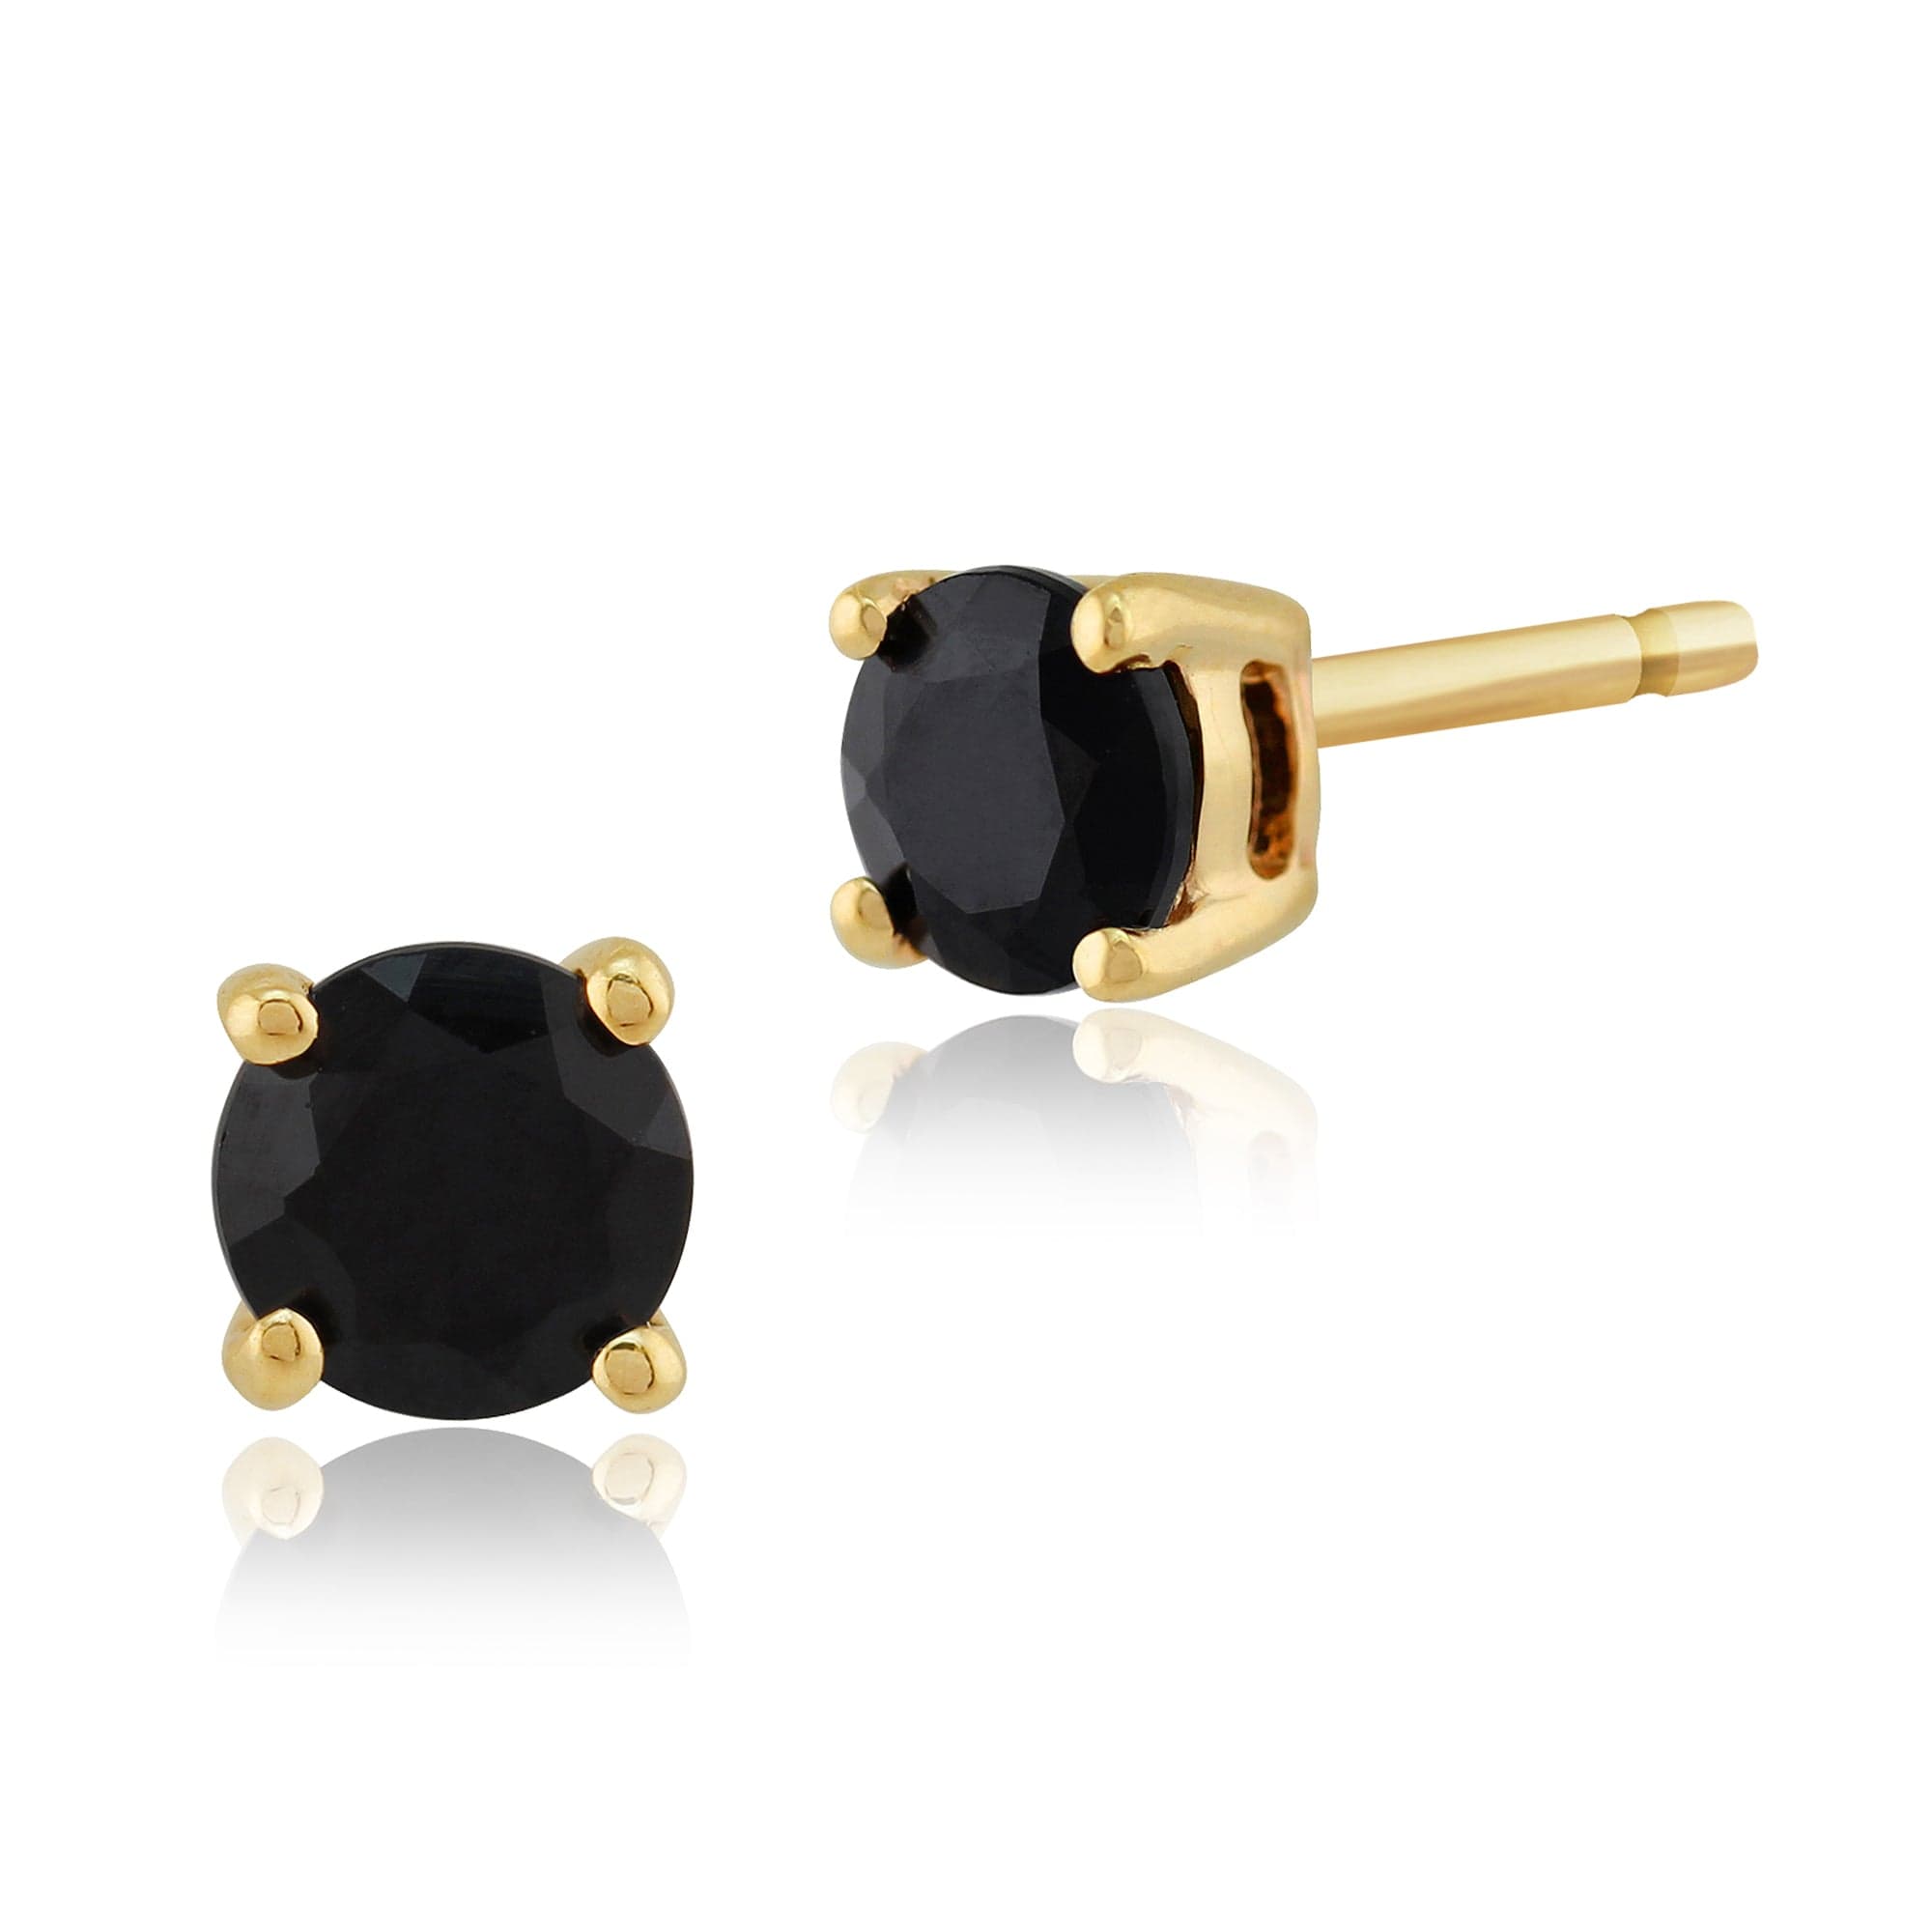 Classic Round Dark Blue Sapphire Stud Earrings with Detachable Diamond Square Earrings Jacket Set in 9ct Yellow Gold - Gemondo